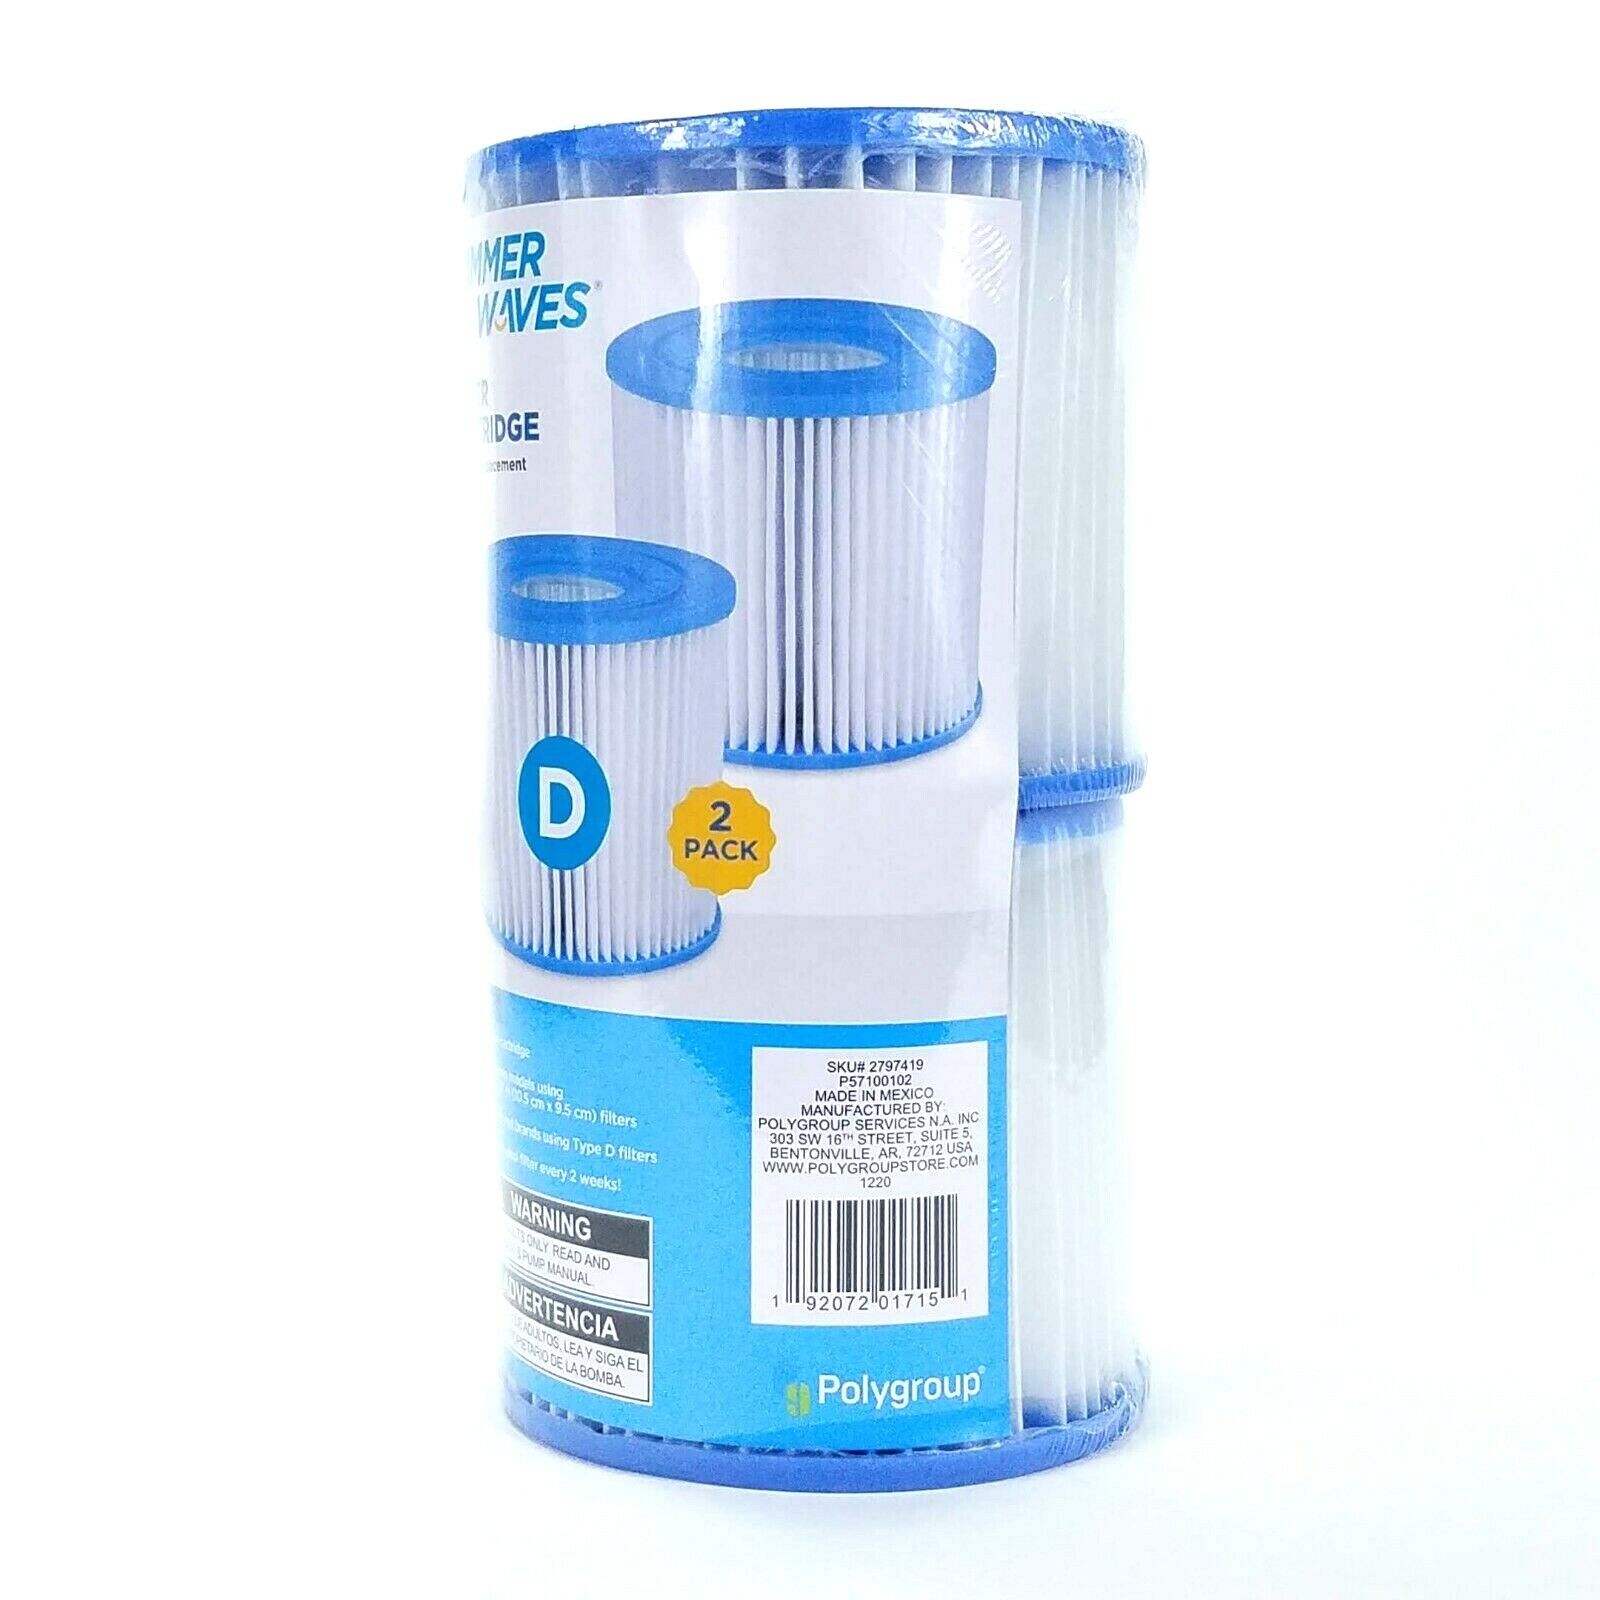 Summer Waves Swimming Pool TYPE D Filter Pump Cartridge 2 Pack Polygroup In Hand Summer Waves P57100102 - фотография #5